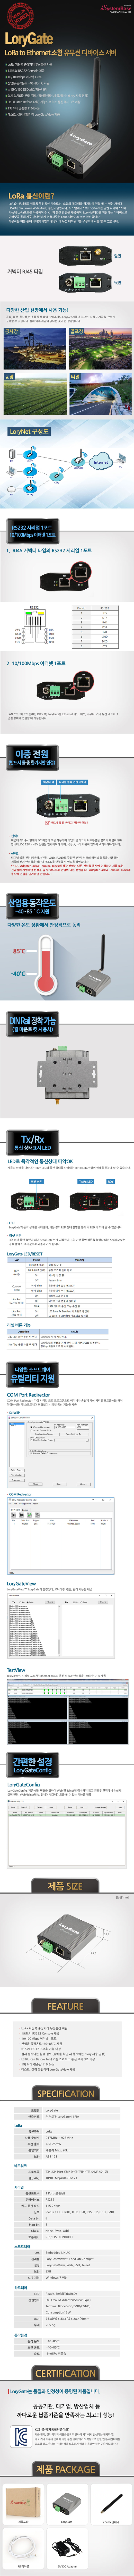 LoryGate_OFFICIAL_131807.jpg